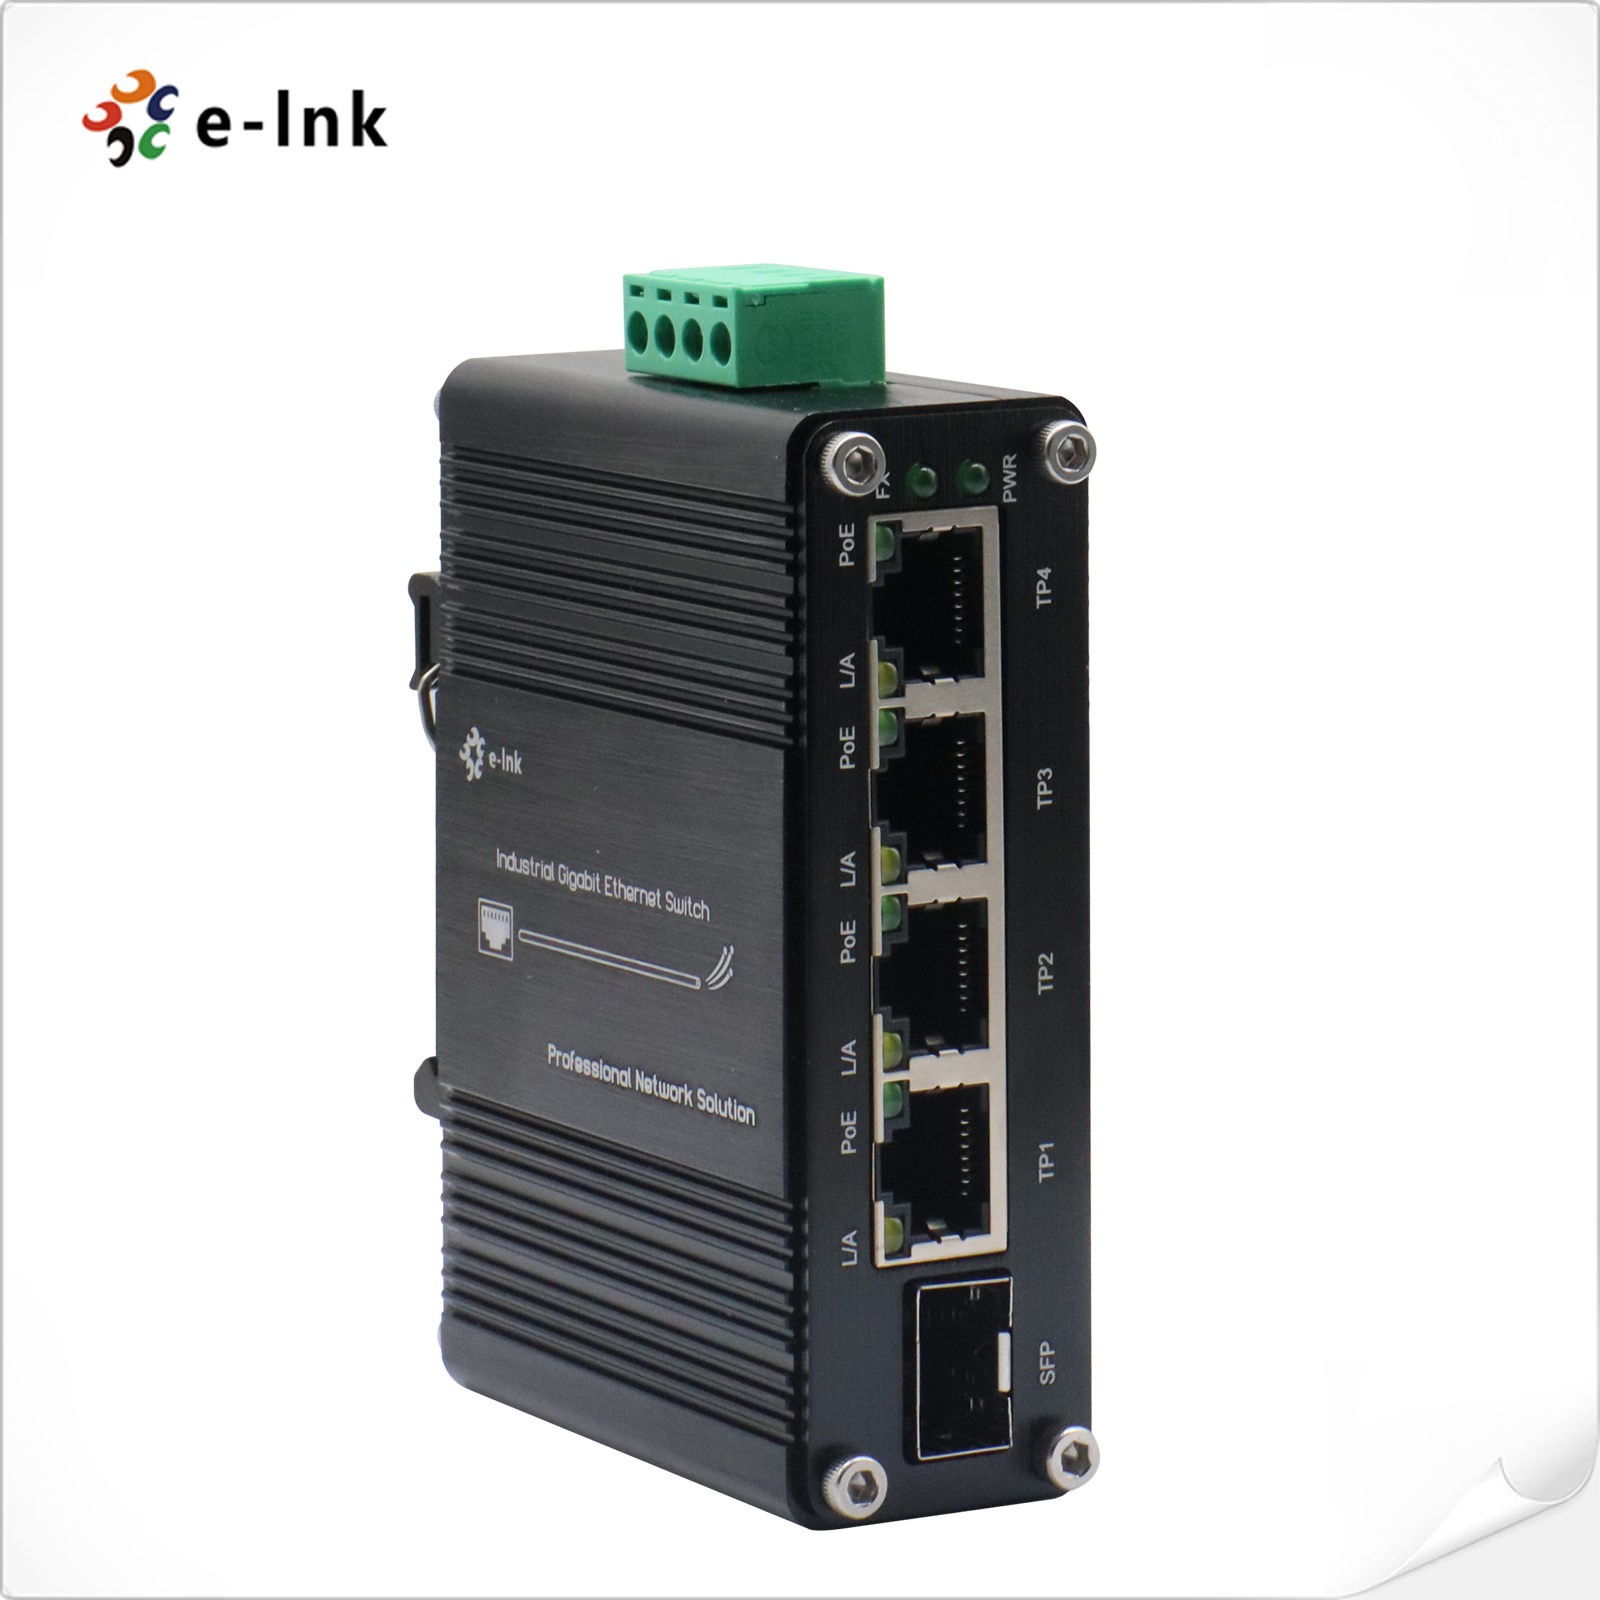 Mini Industrial 4-Port 10/100/1000T 802.3at PoE + 1-Port 100/1000X SFP Ethernet Switch